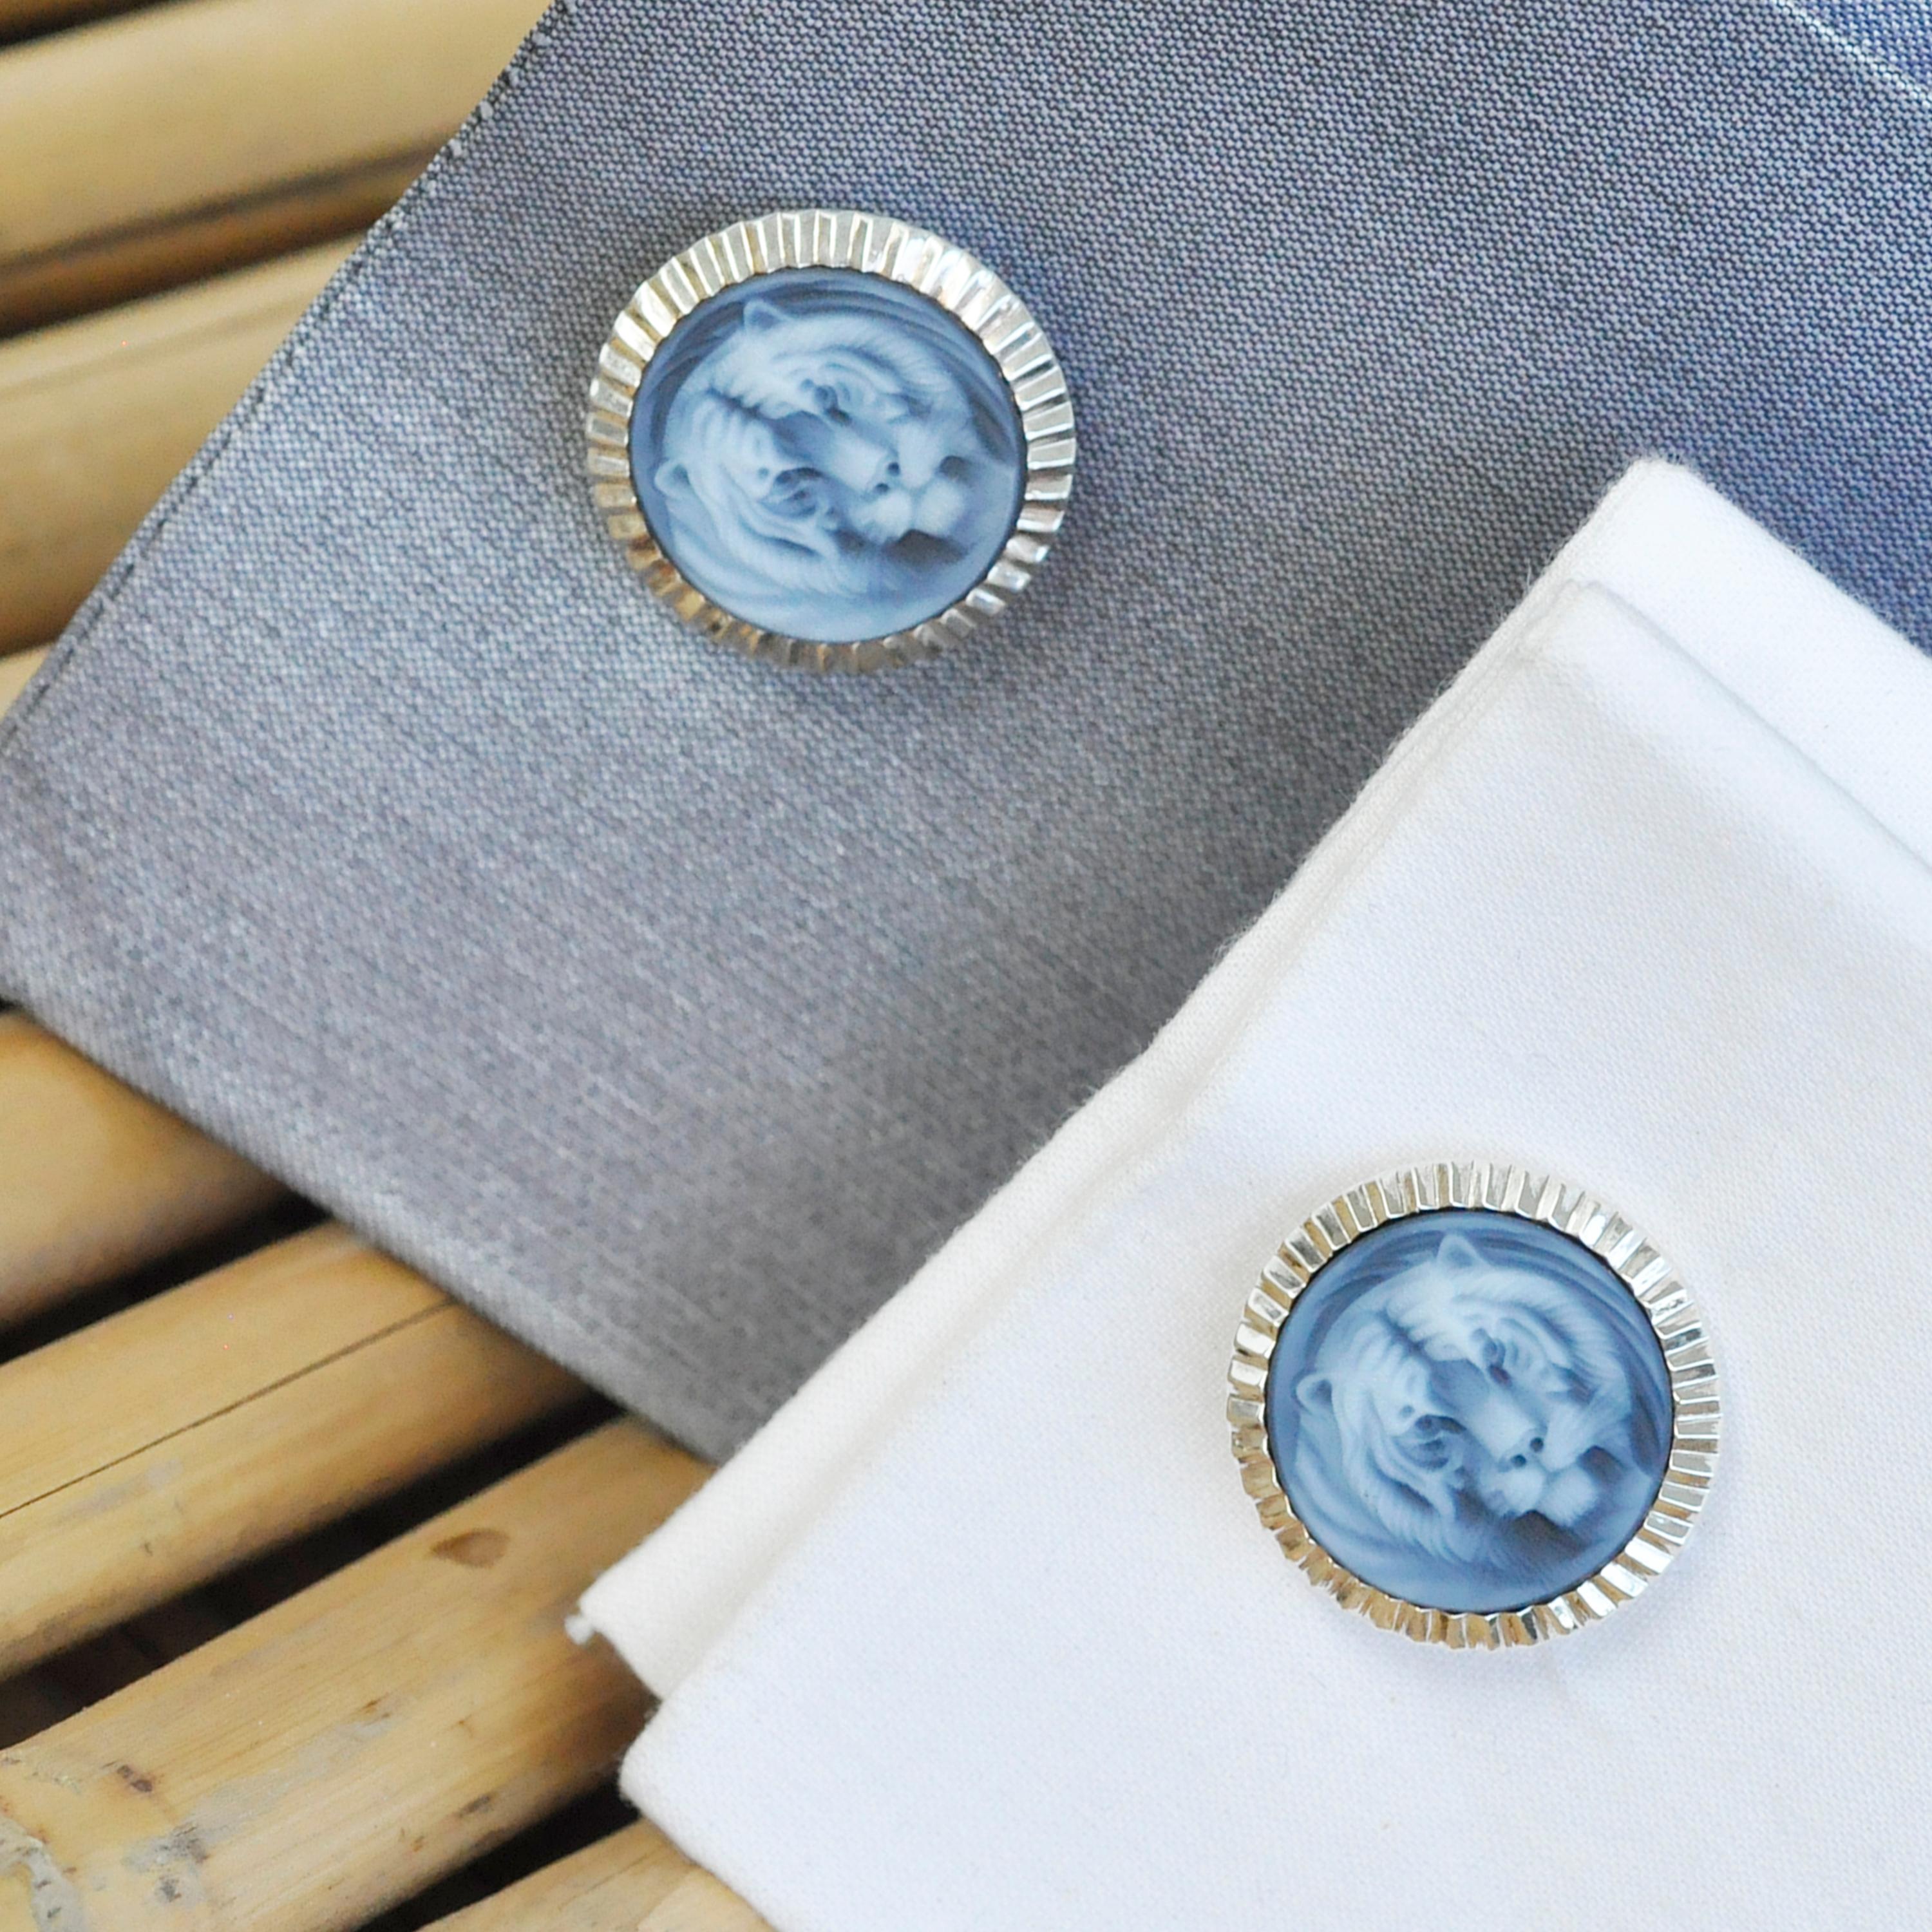 Here's our exclusive pair of tiger cufflinks made in sterling silver. The tiger cameos are made in Germany by an expert cameo engraver on the relief of 100% natural agate rock from Brazil (a variety of chalcedony) such that the carved tiger pops out